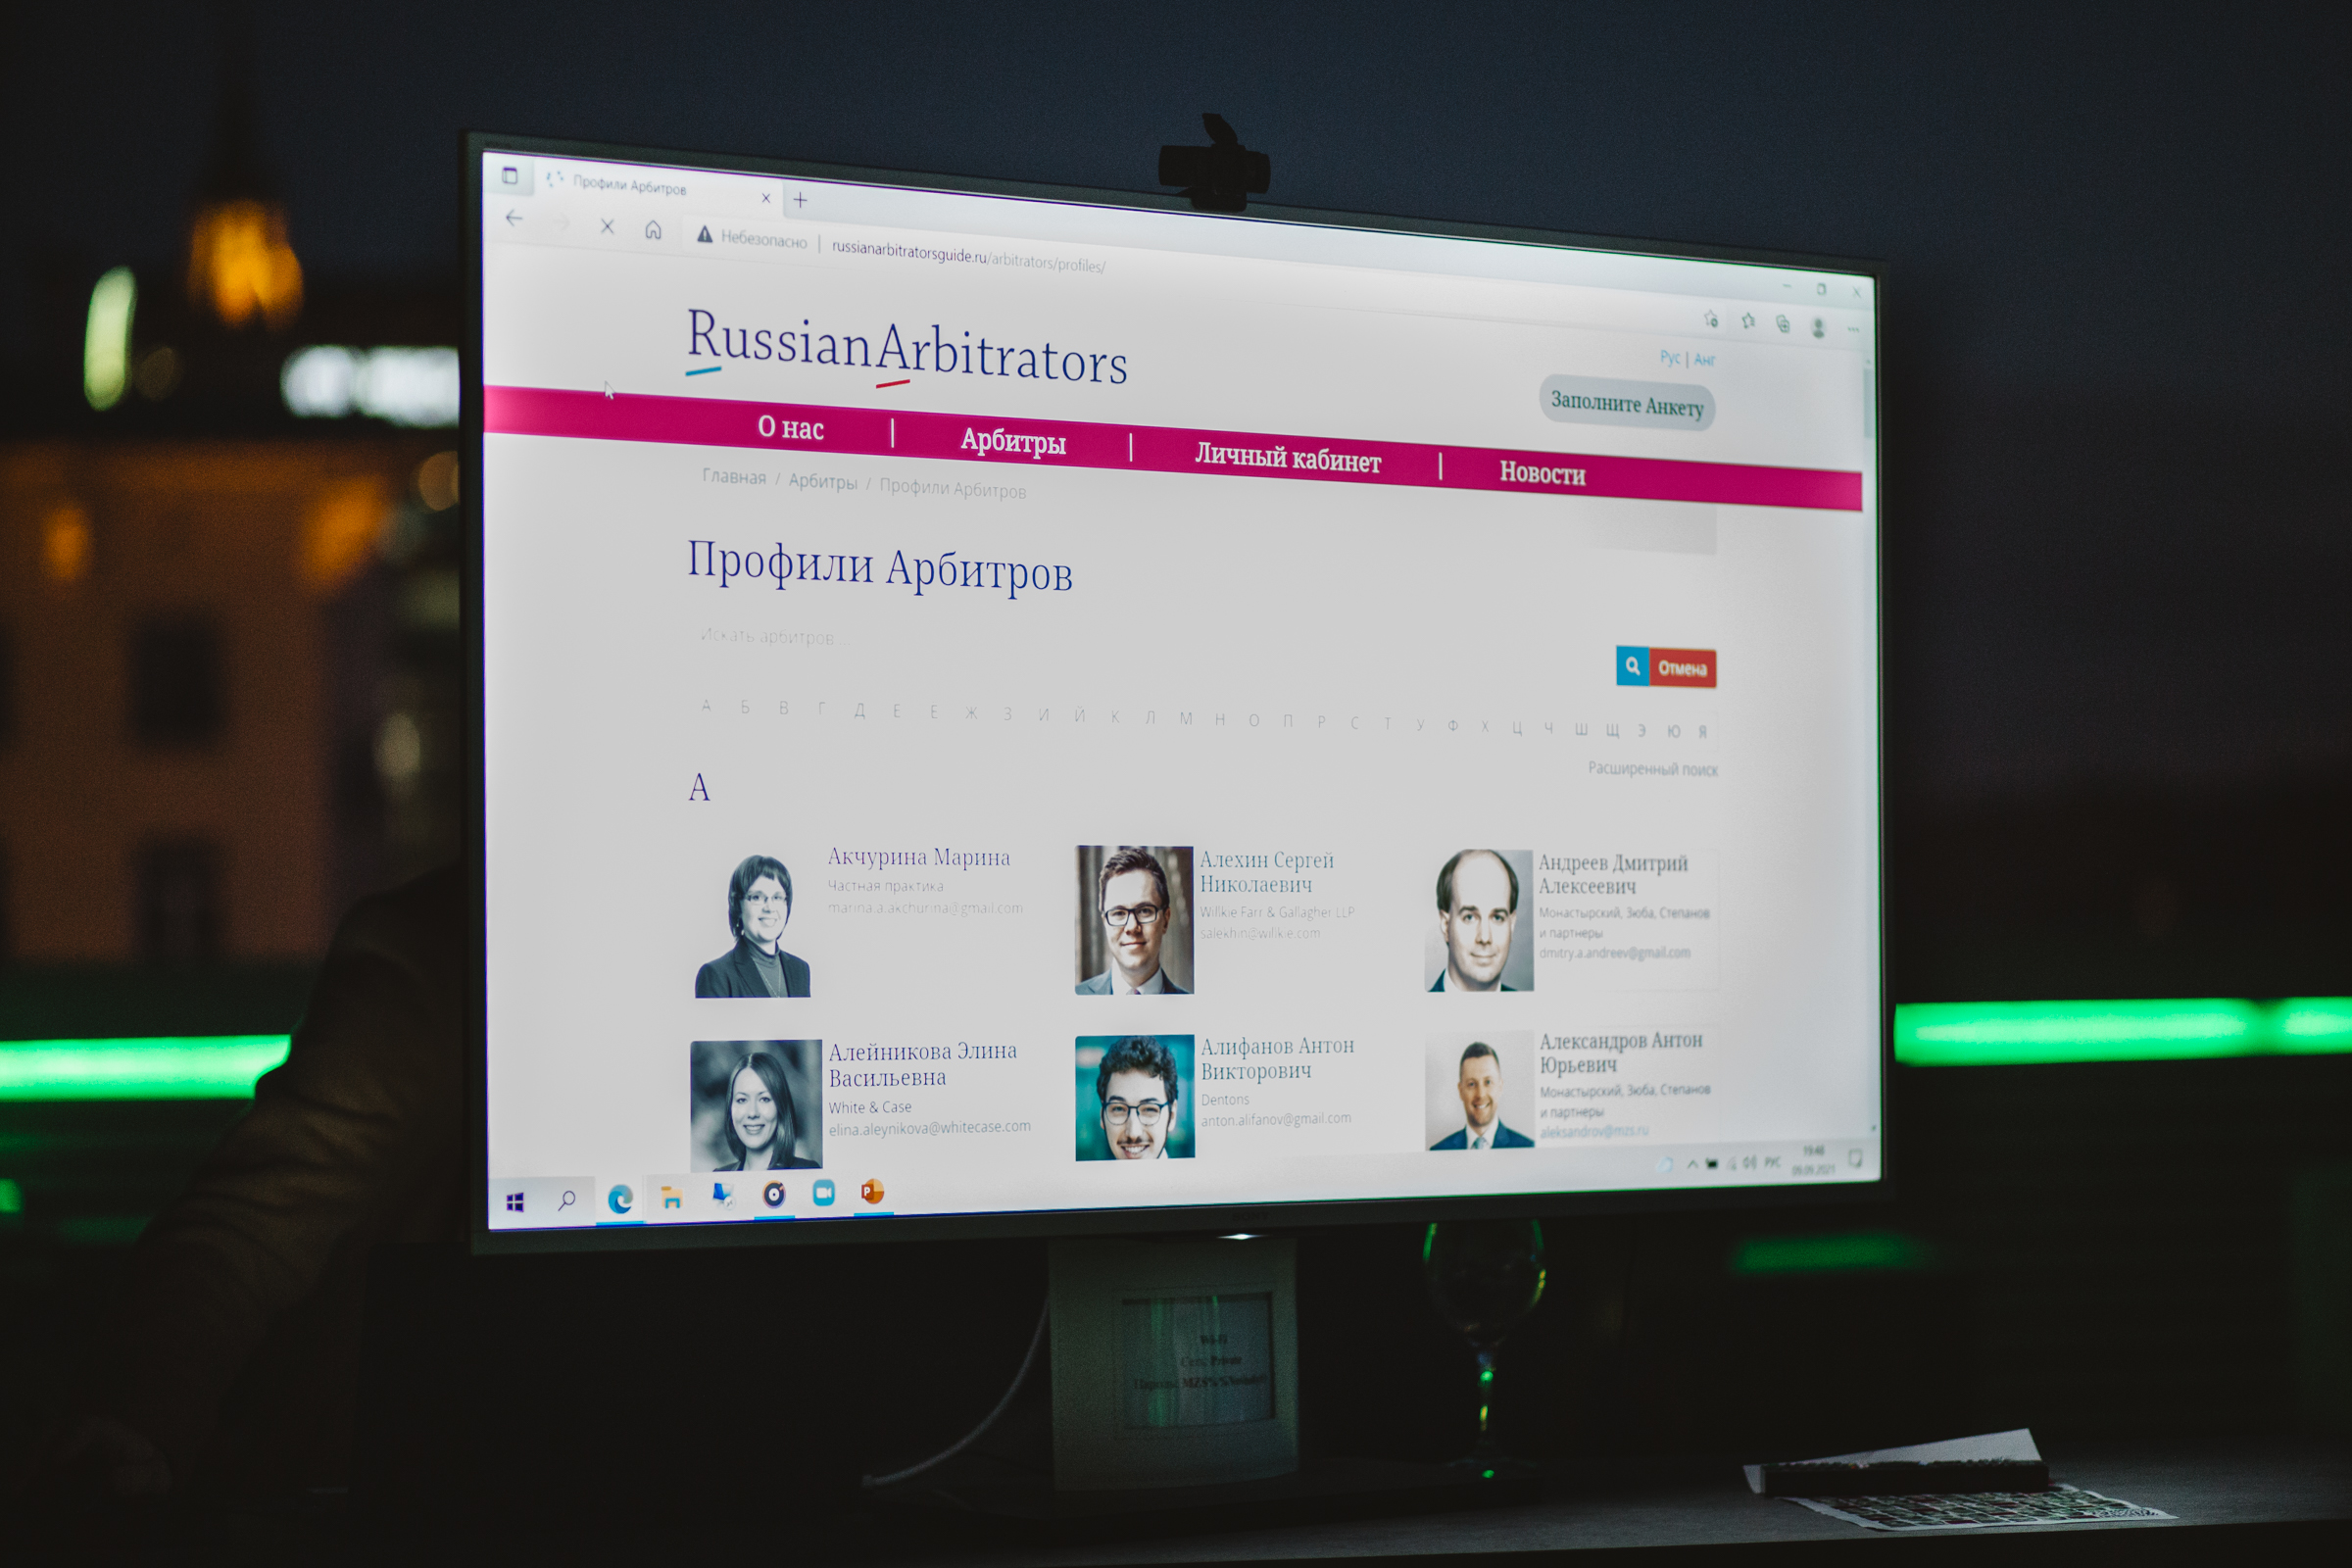 Russian Arbitrators Guide: Next Generation is officially launched!